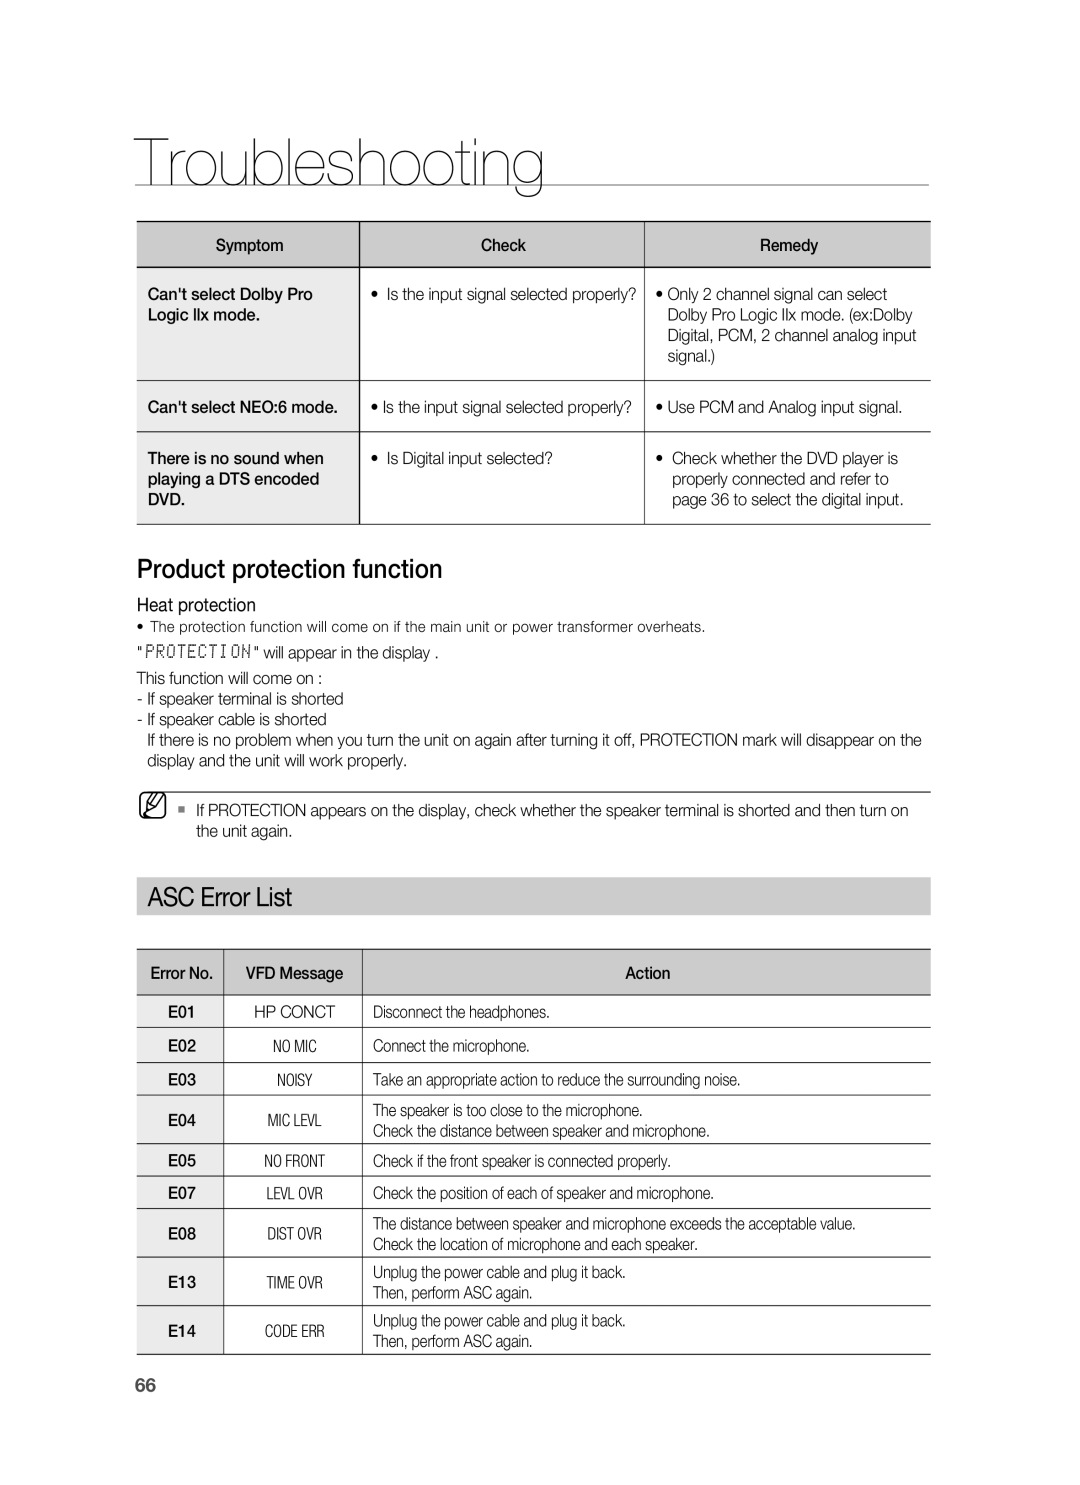 Samsung HW-C900-XAA user manual Troubleshooting, Product protection function, ASC Error List, Heat protection 